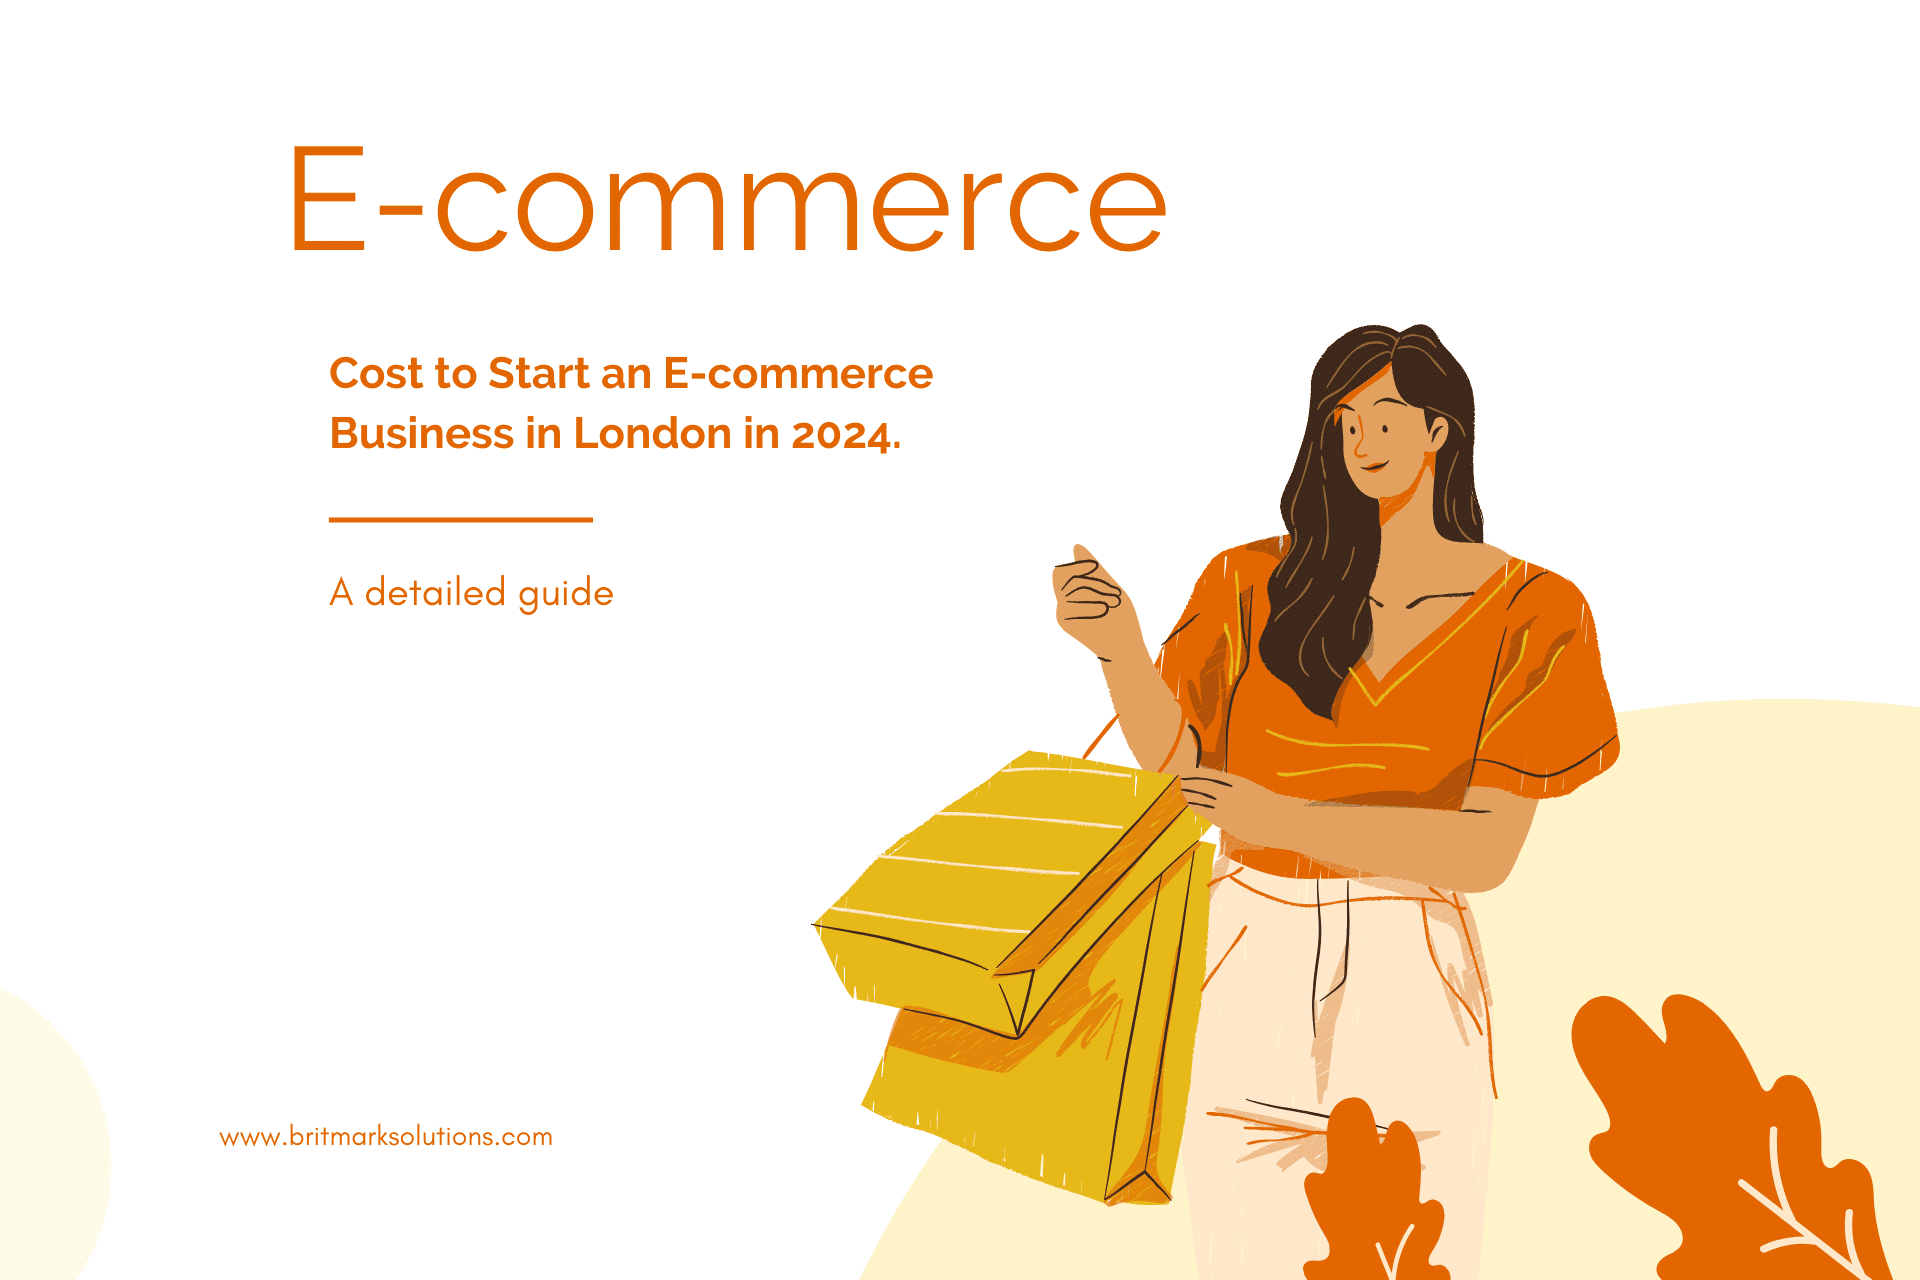 Cost to Start an E-commerce Business in London in 2024.